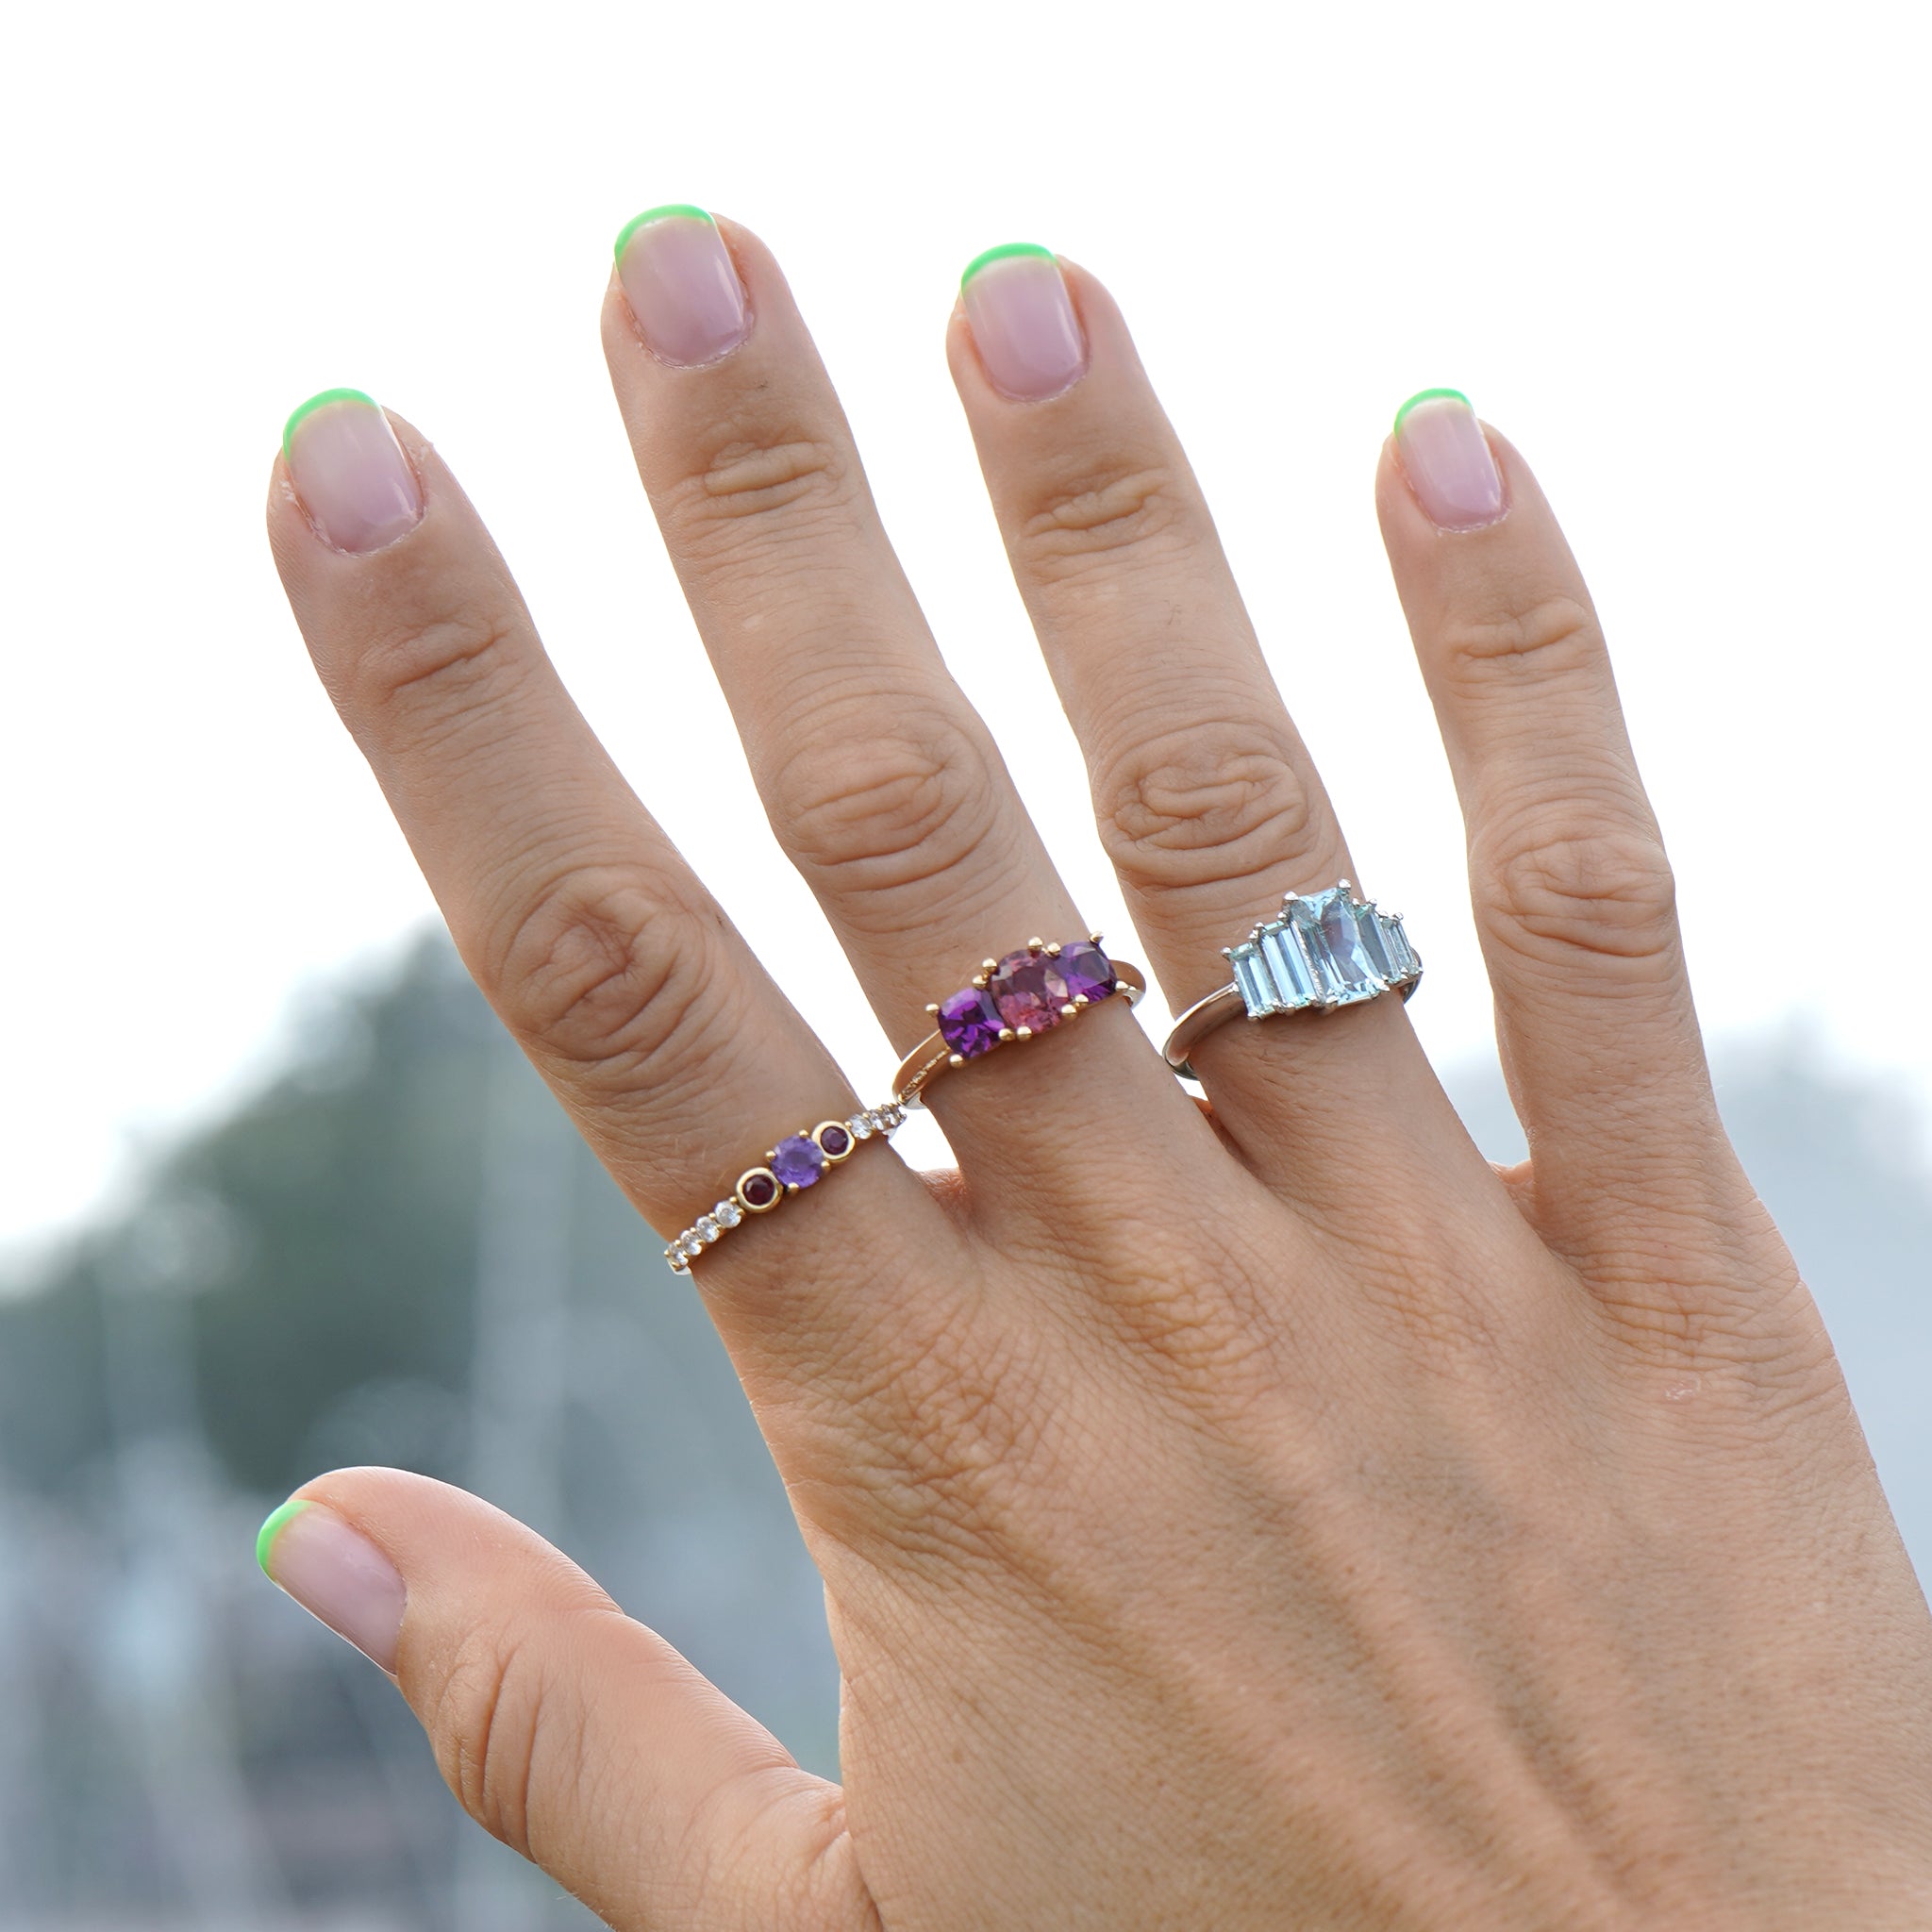 Woman's hand pointing up to the sky showing off three Lico Jewelry rings on middle fingers, including Marine Deco Ring with aquamarine gemstones in platinum.